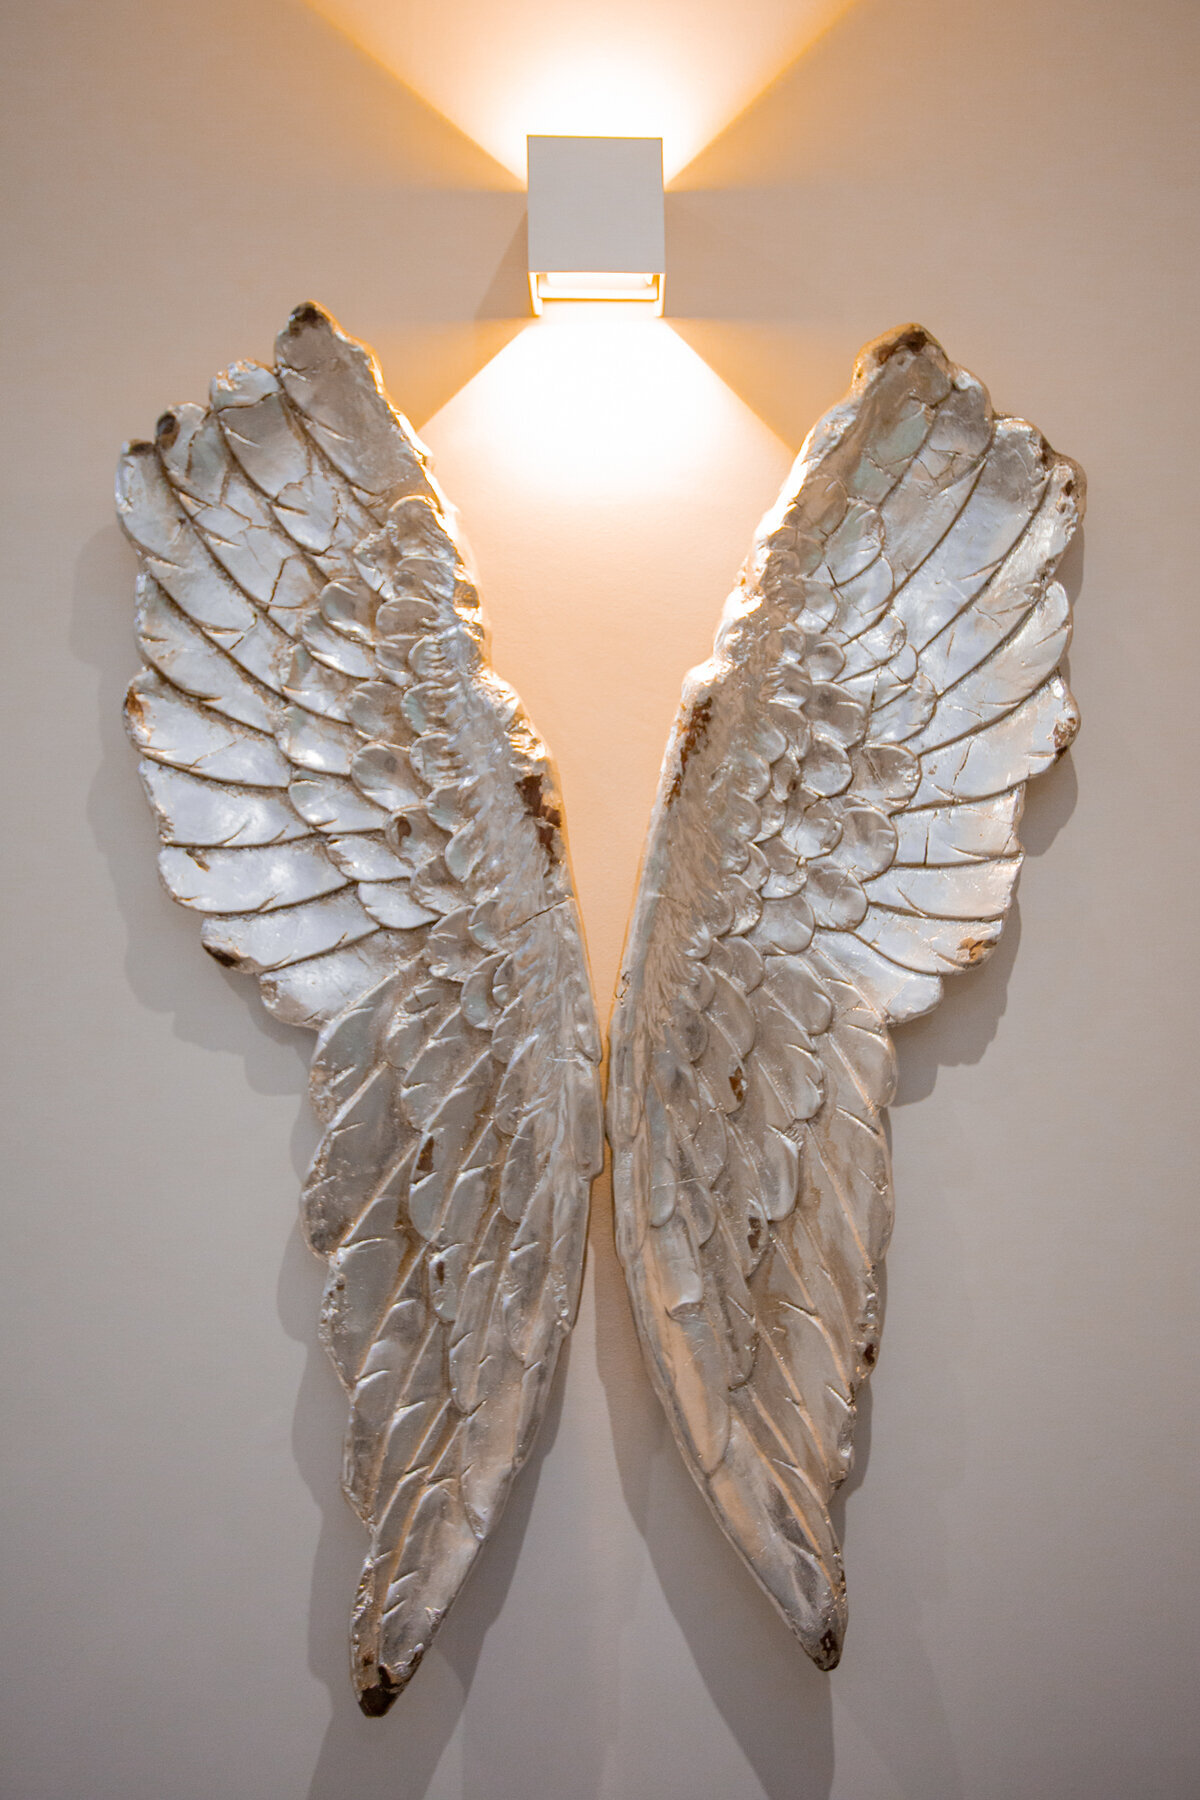 About - Angel wings wall decor at Missy's Beauty Nantwich